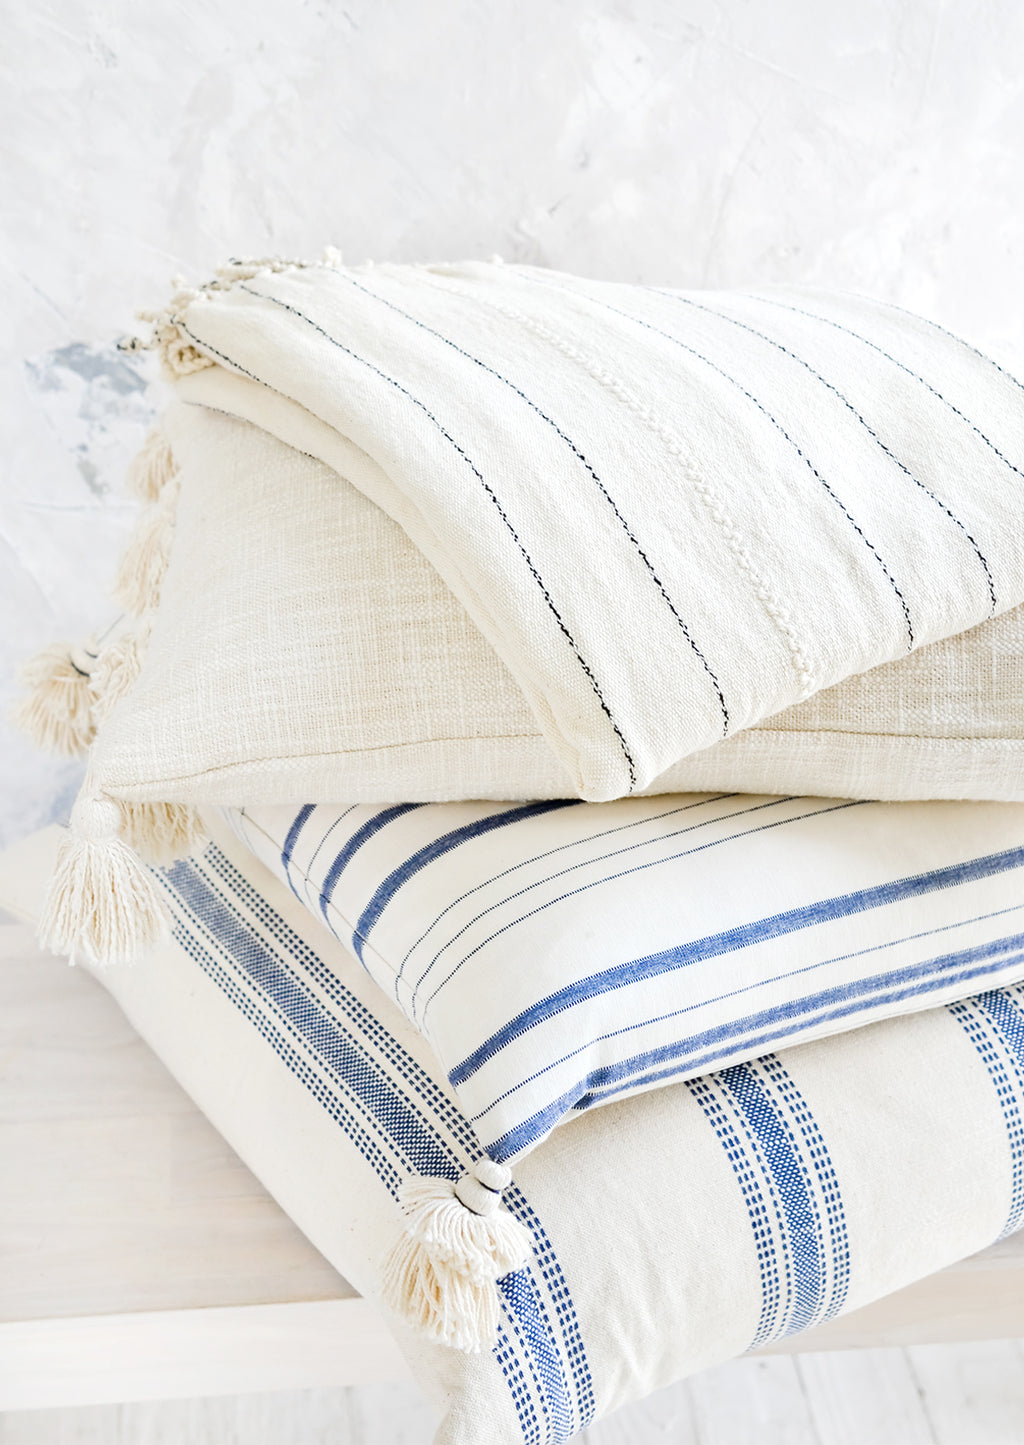 2: A stack of pillows and blankets in blue, white and cream colors.